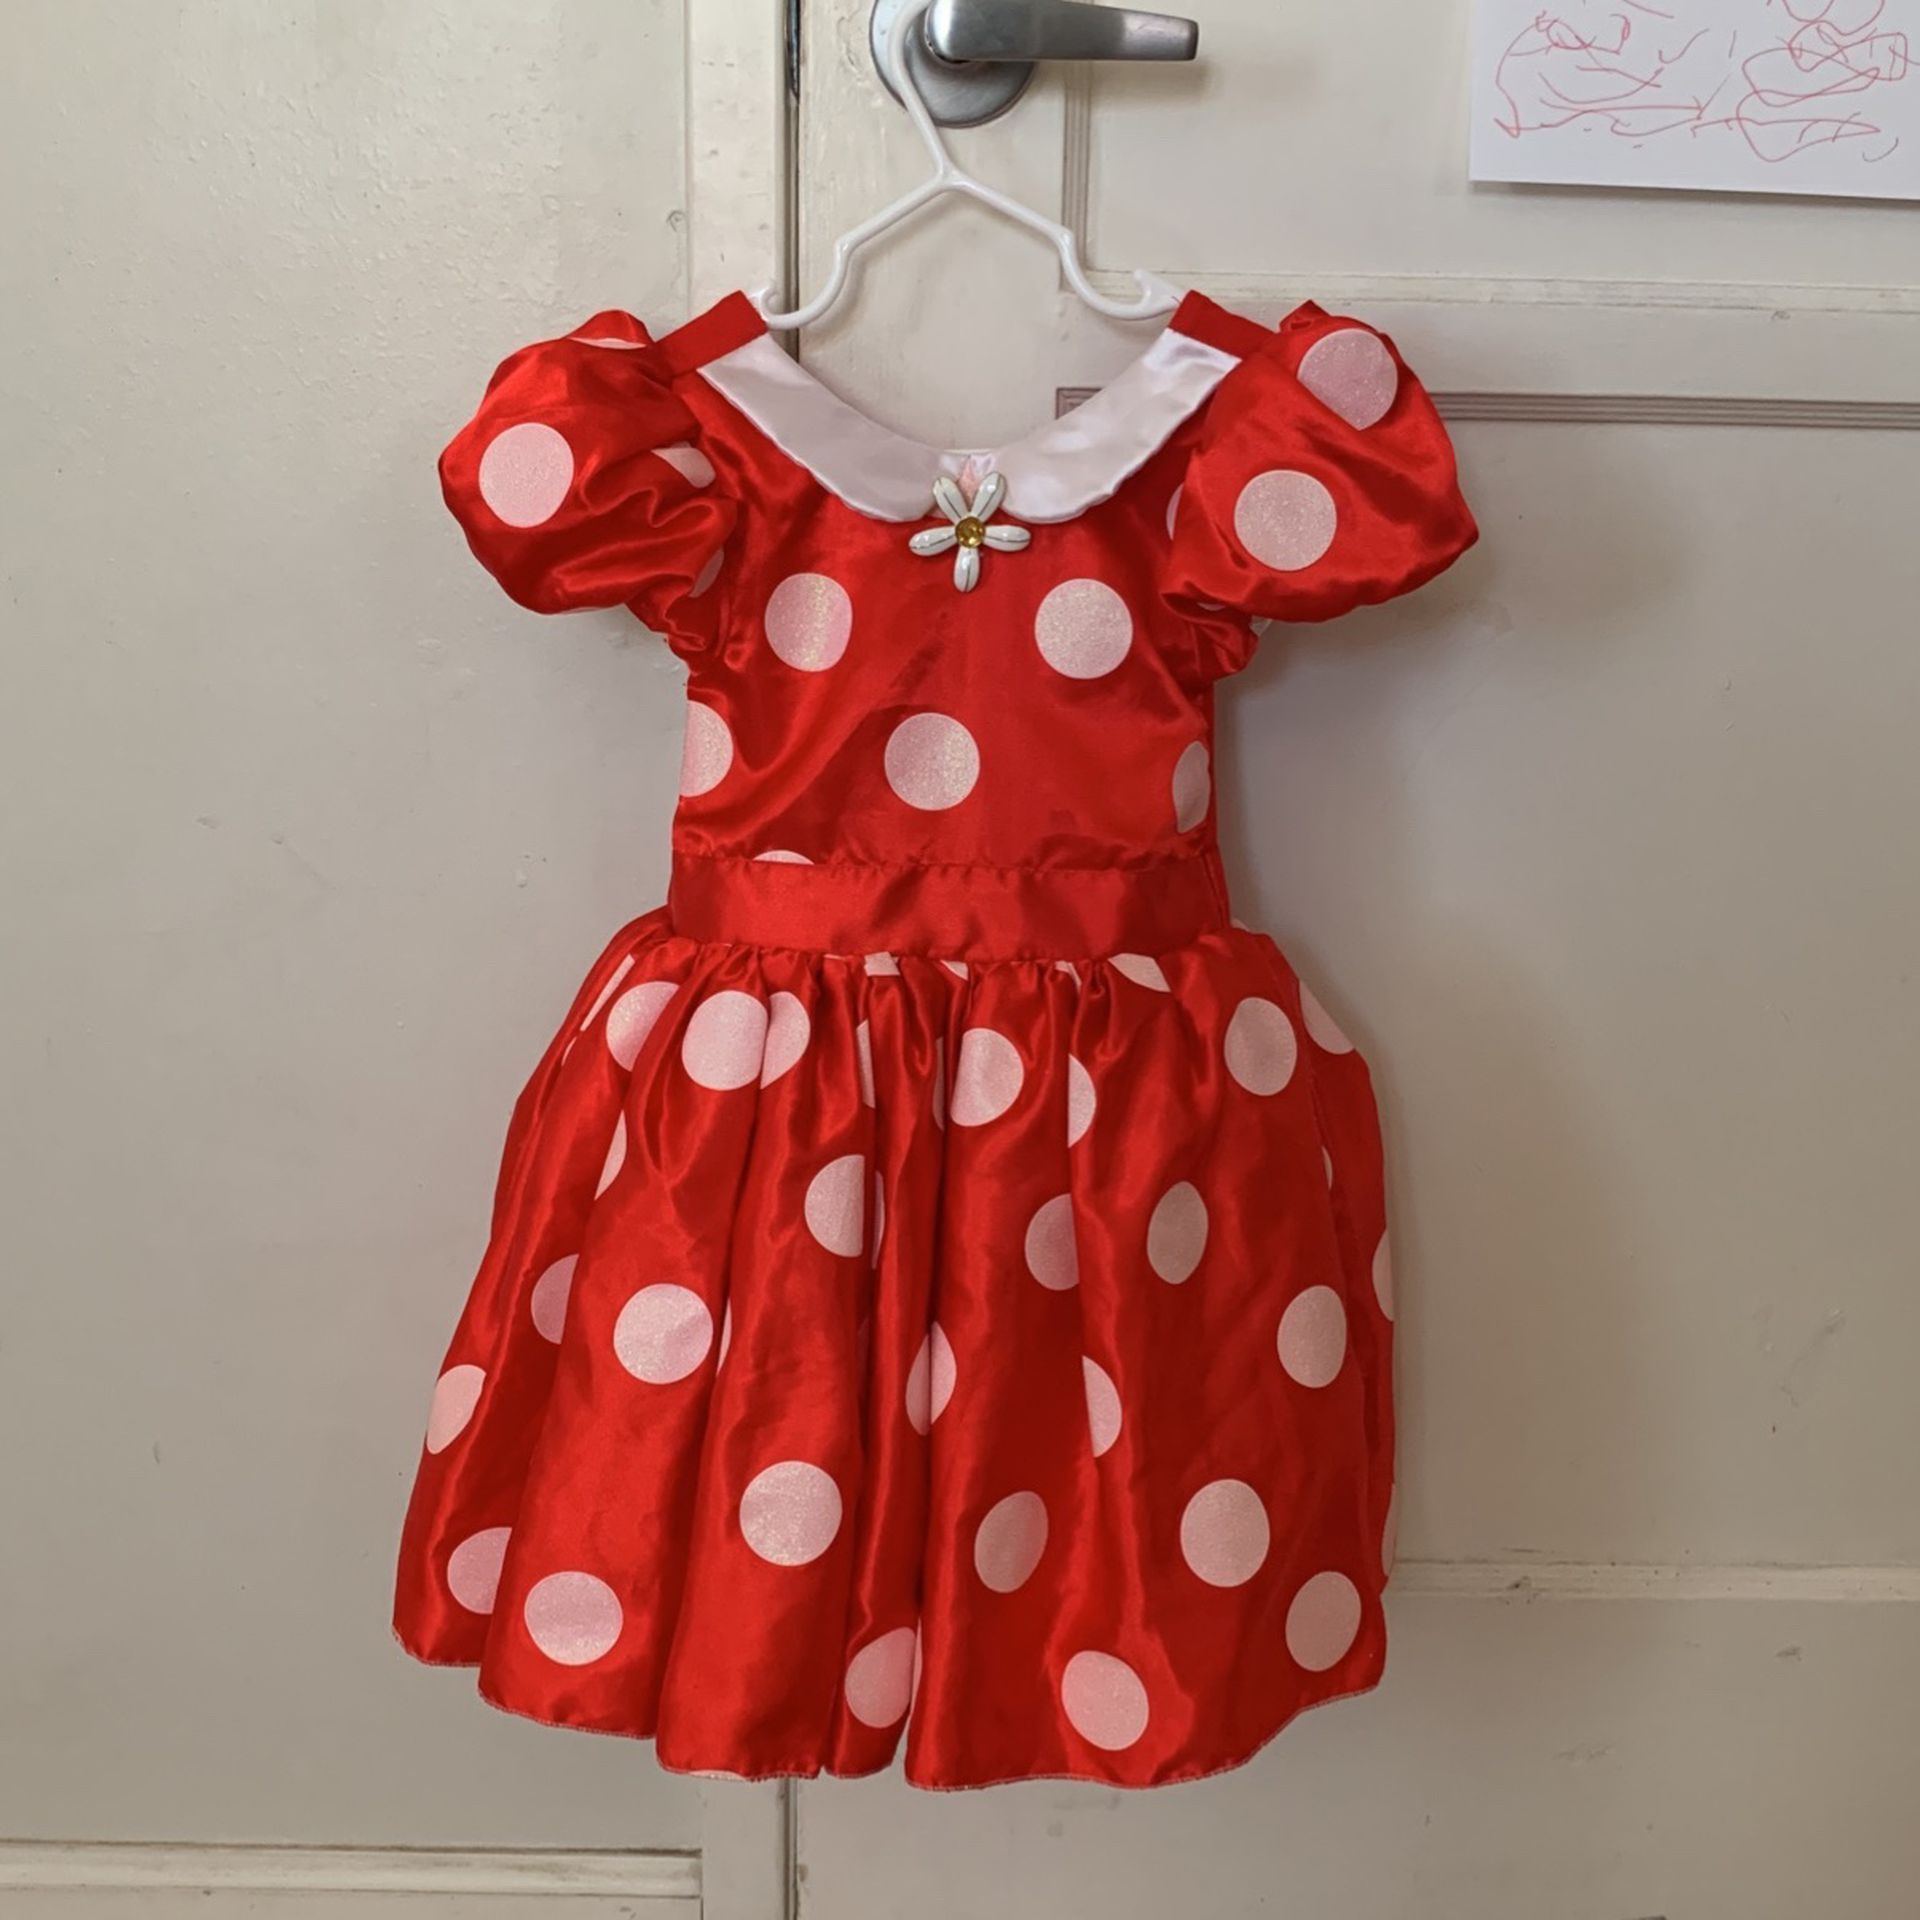 Disney Minnie Mouse Dress Up Costume 3T With Ears!